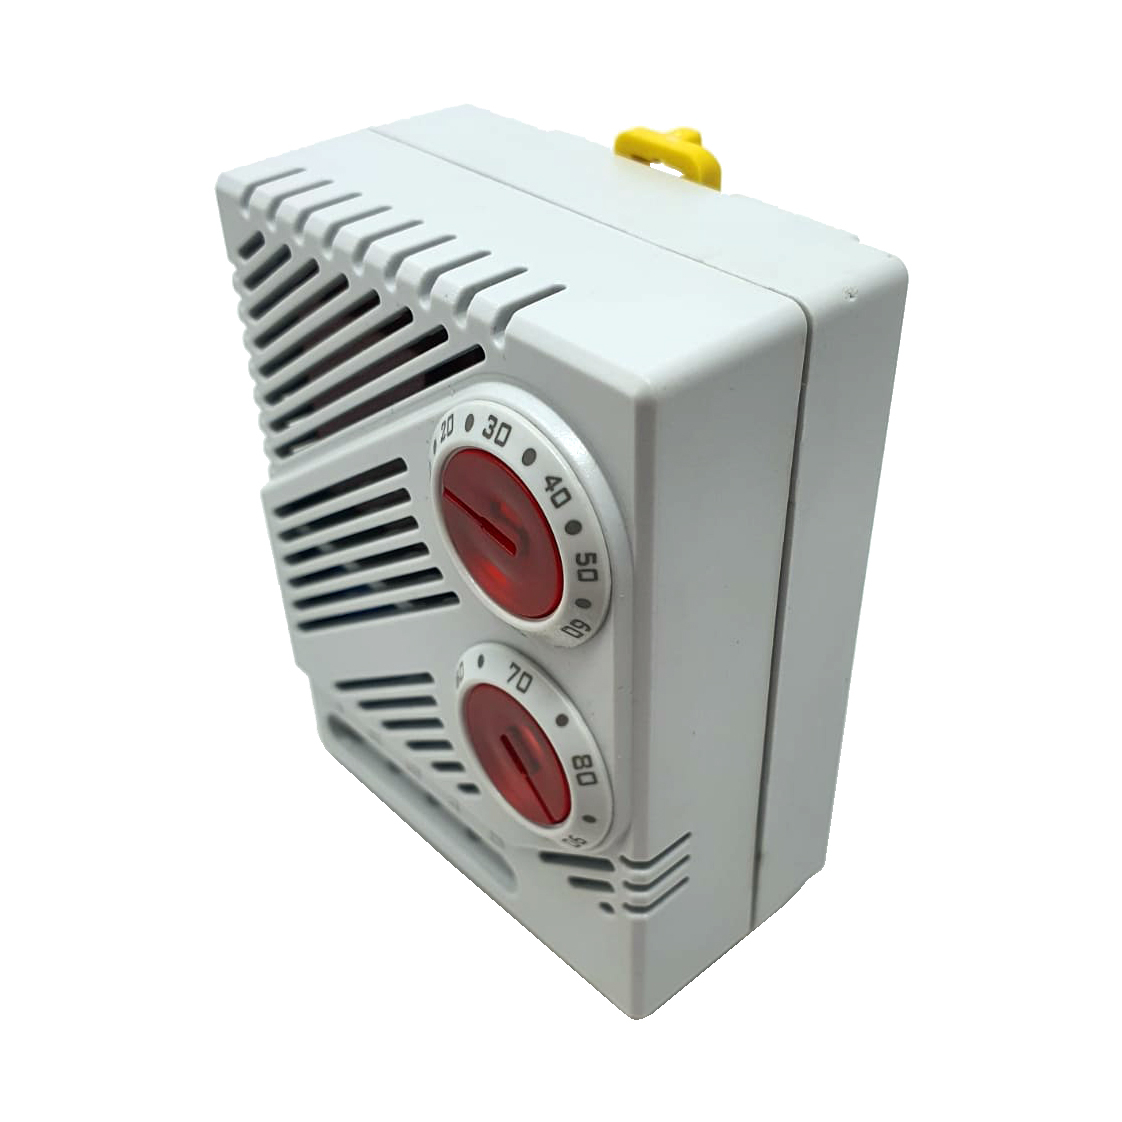 HTE060CO-2 hygorstat+thermostat with electronic sensor and CO contact 230V; 8A ; 0C+60C; 50%...95%RH